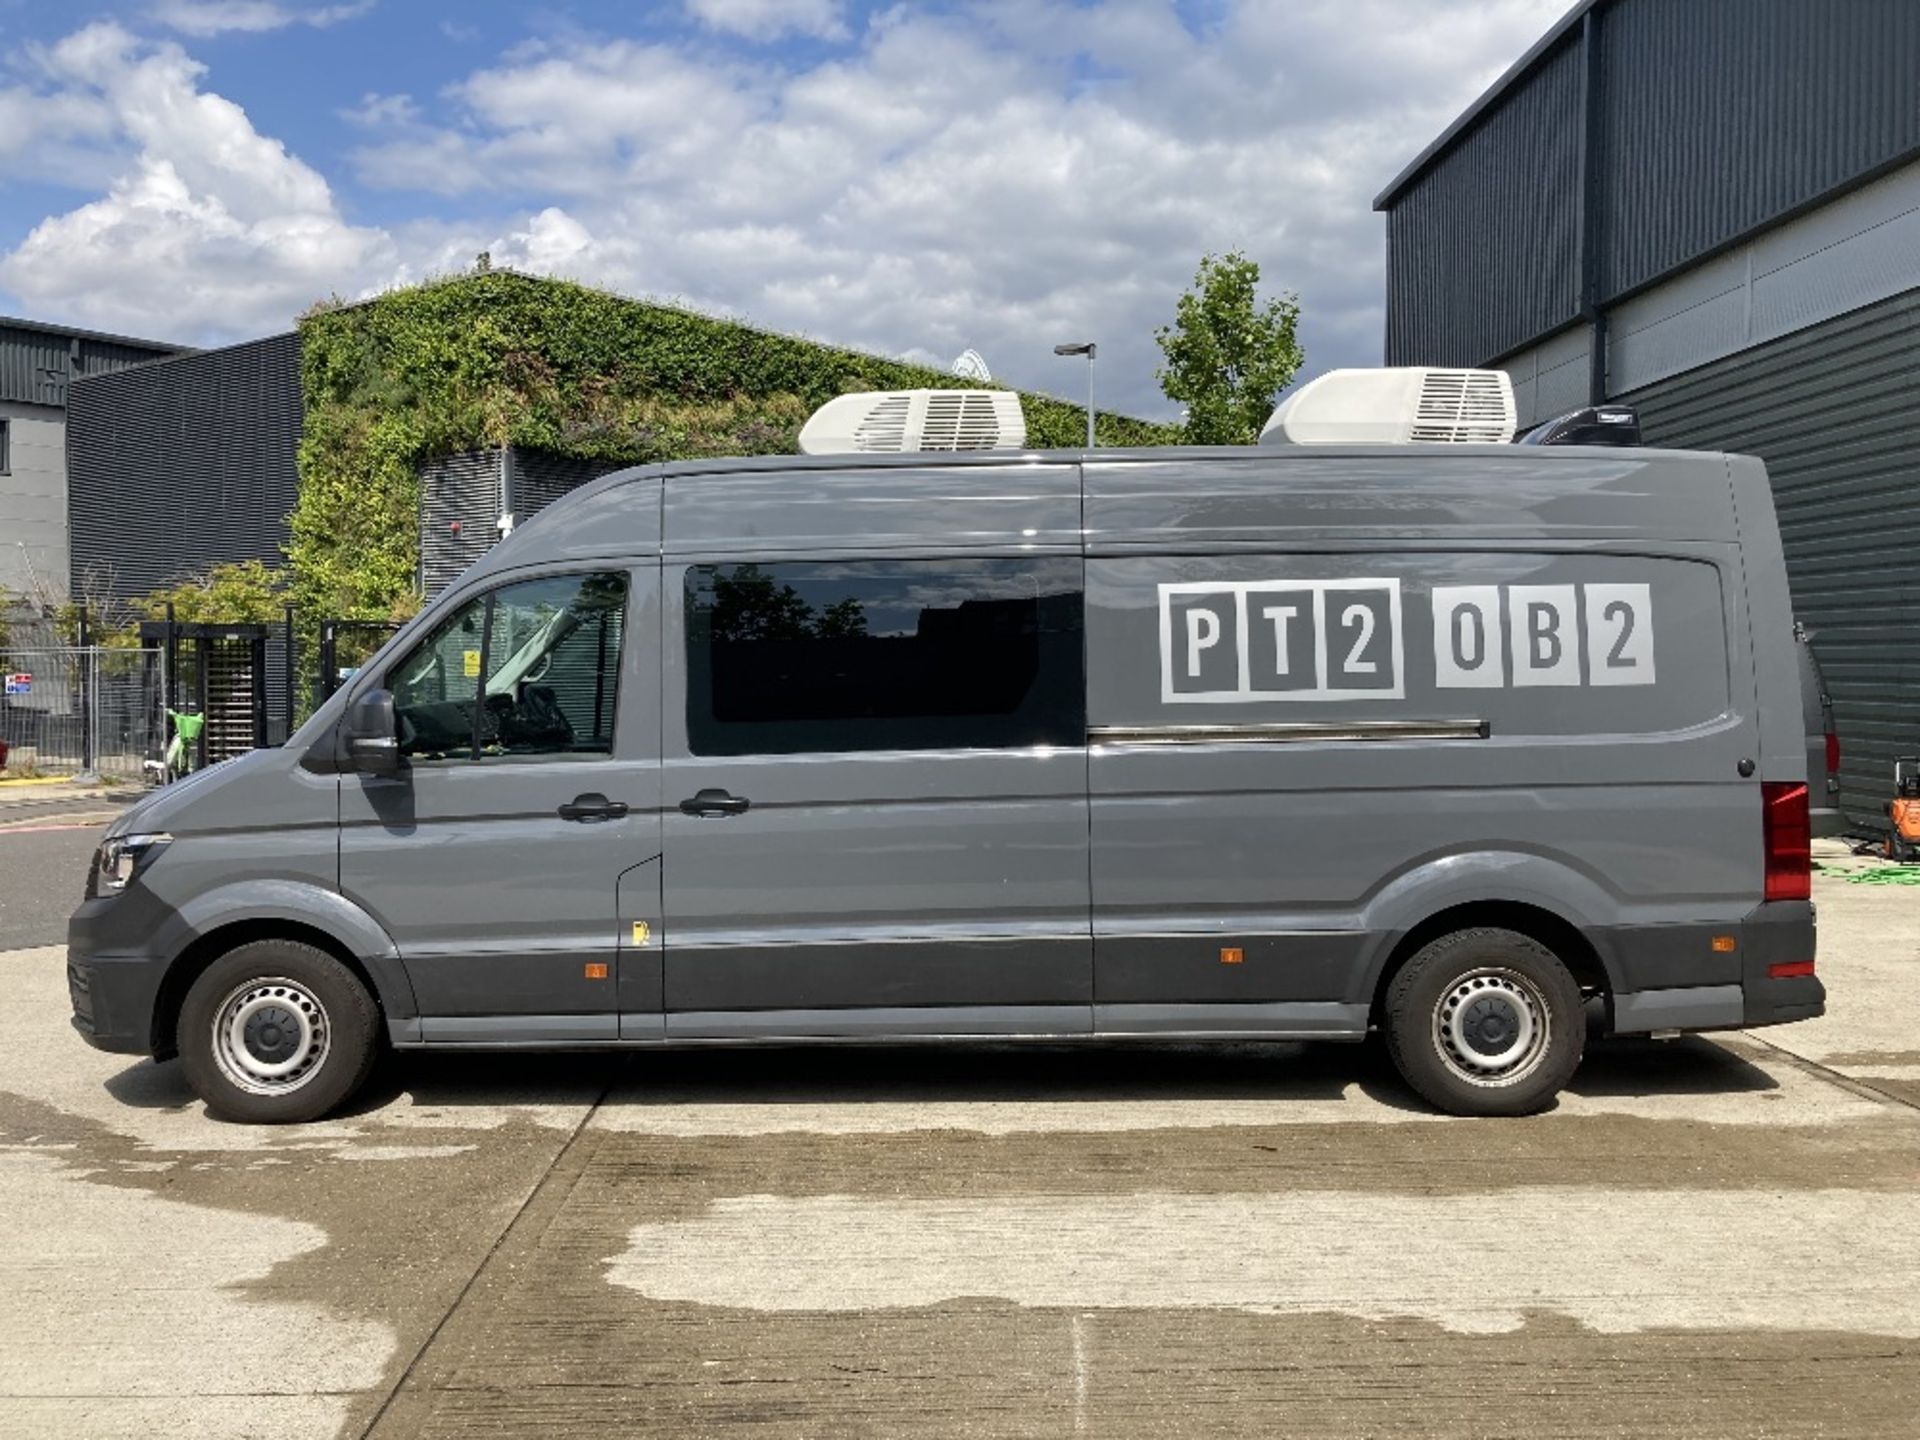 2019 Compact Cinematic Outside Broadcast Vehicle - Image 9 of 50